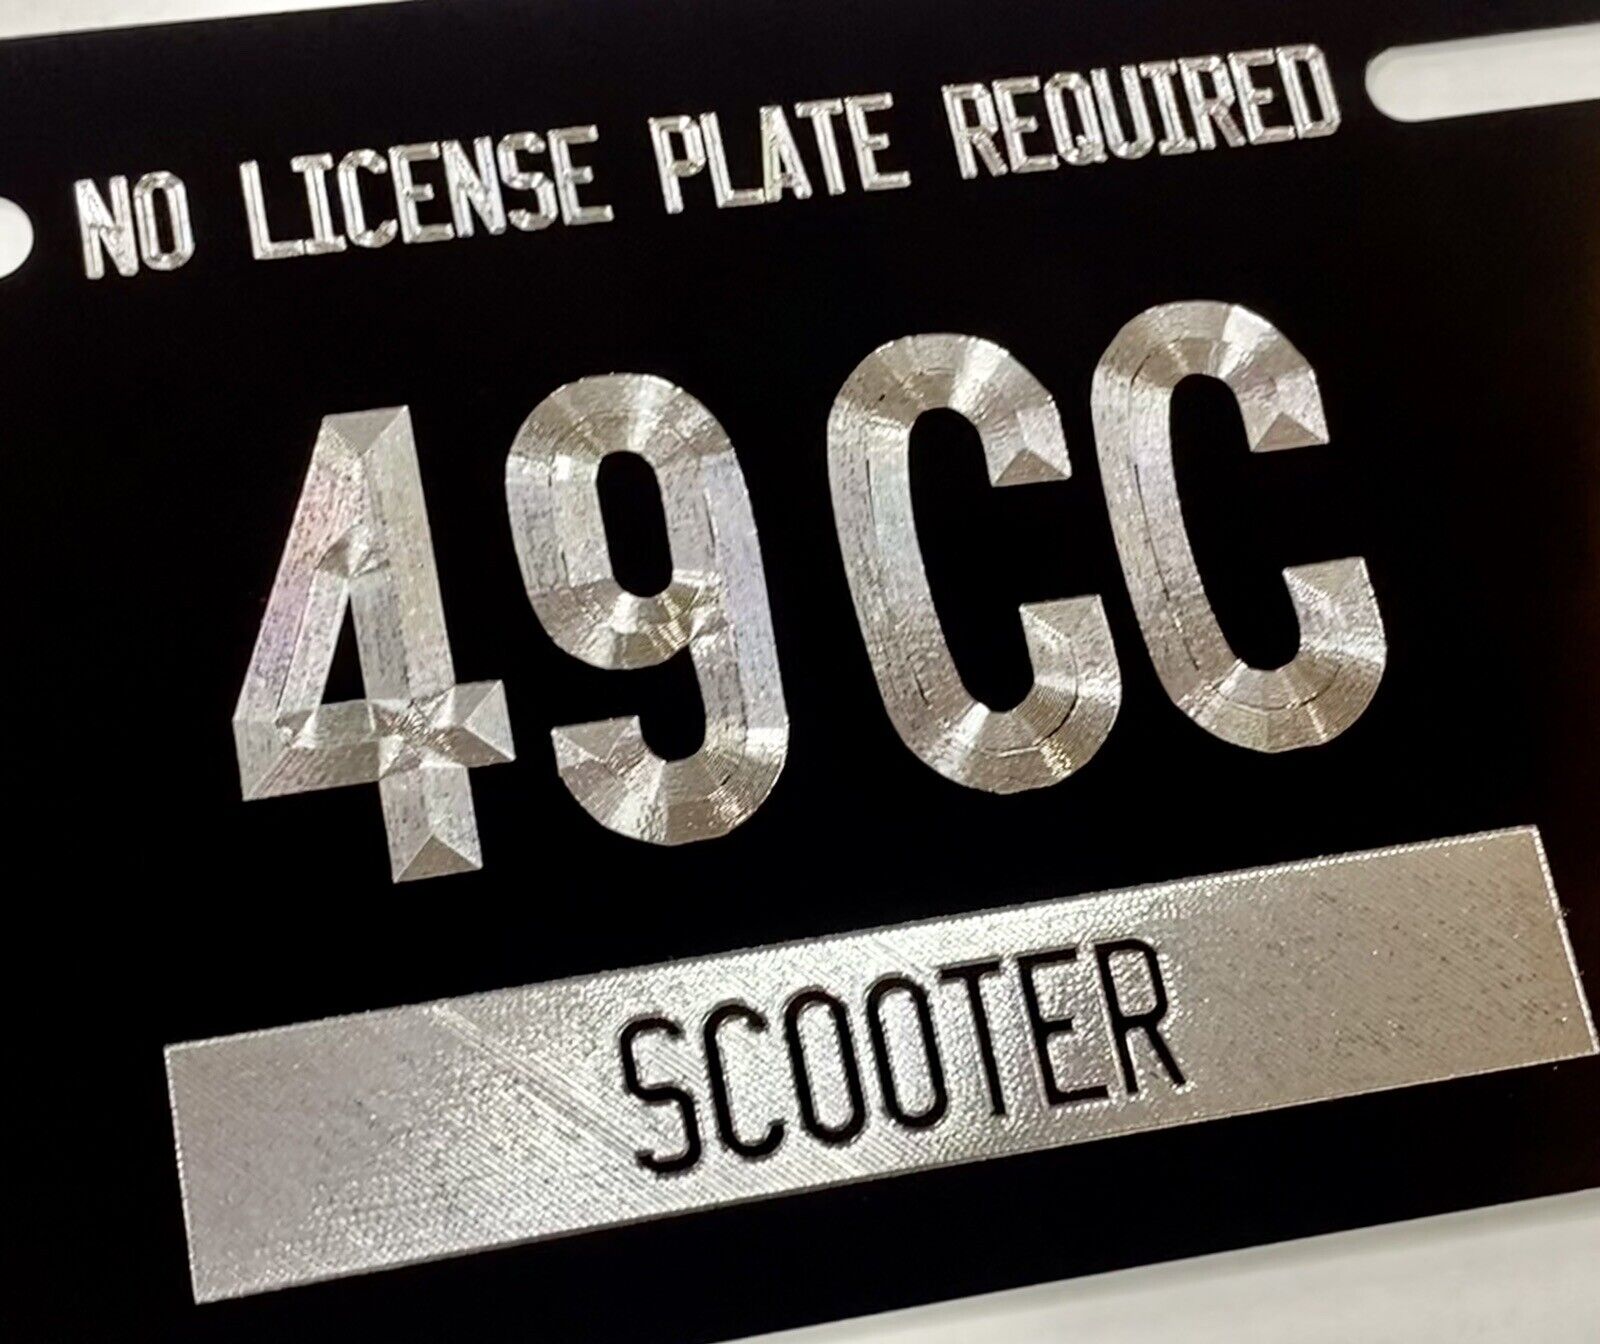 Scooter Moped Tag No License Plate Required 49cc Diamond Etched Metal 7x4